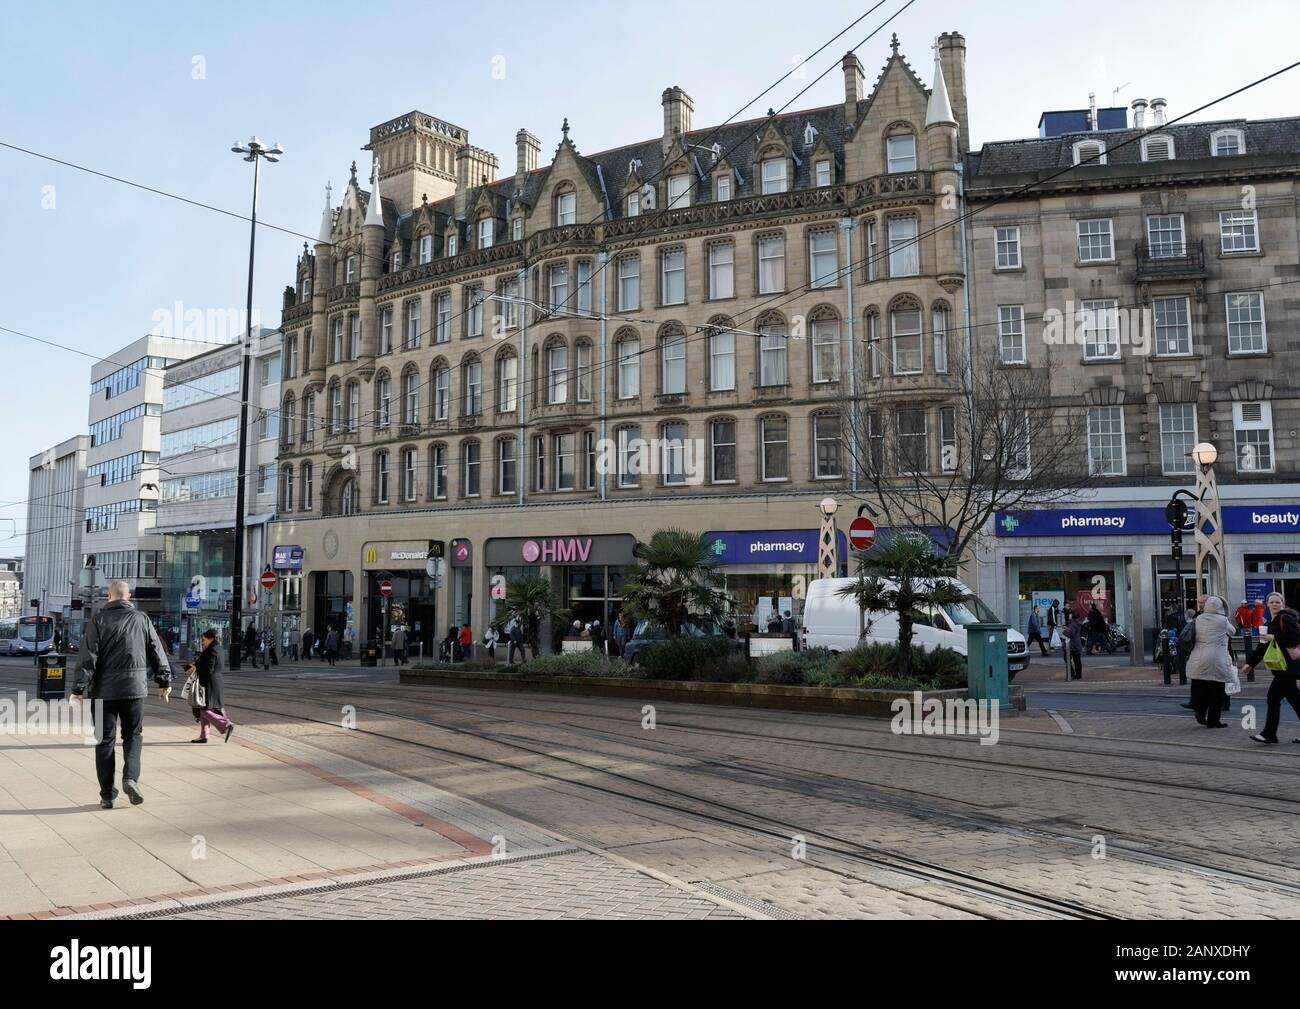 Shops and pedestrians in Sheffield City centre on High St, England UK Stock Photo